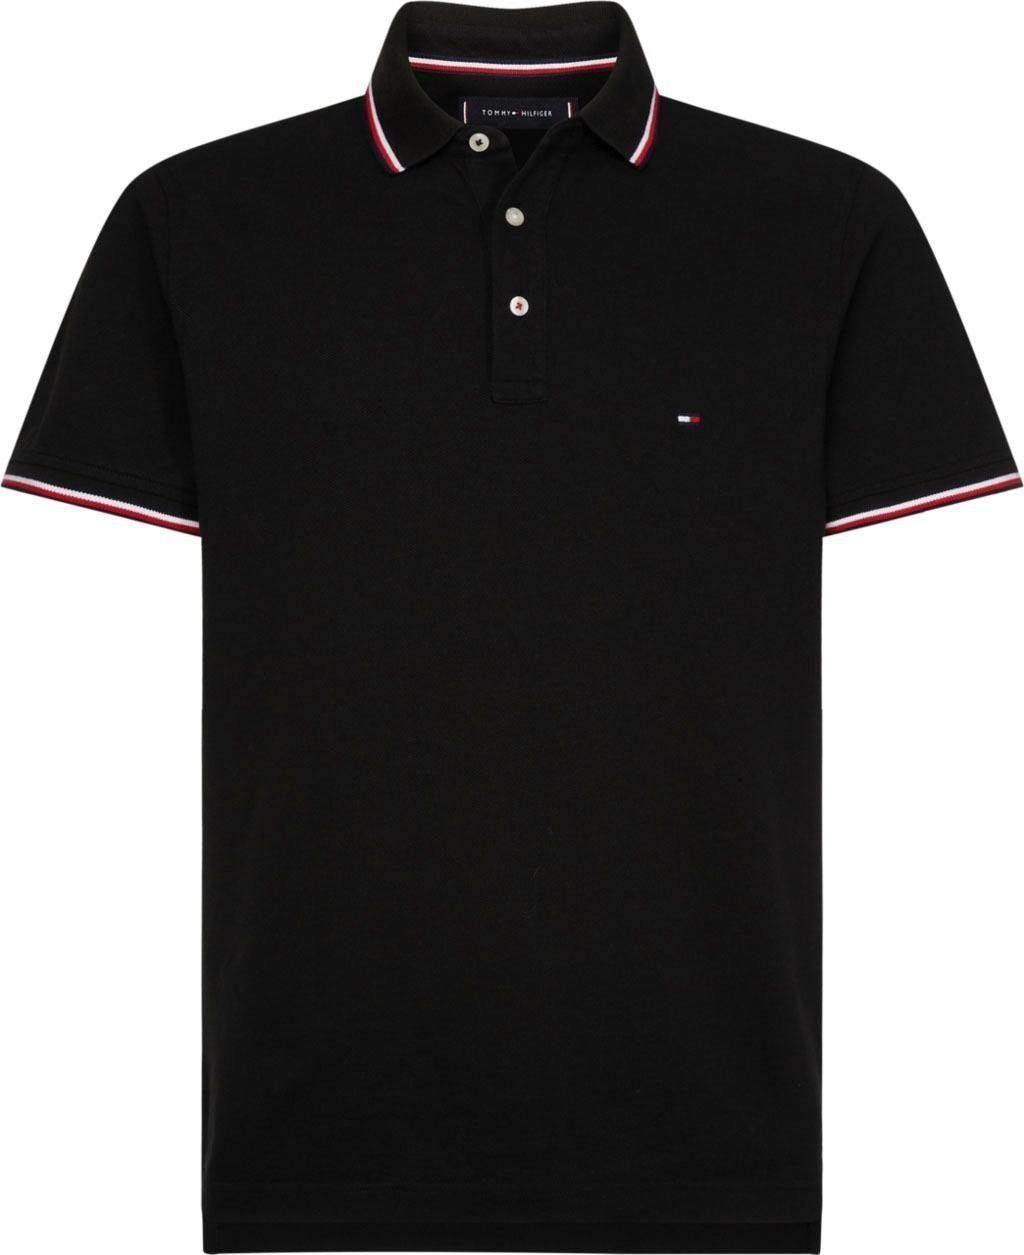 TOMMY POLO Hilfiger black TIPPED Poloshirt SLIM Tommy